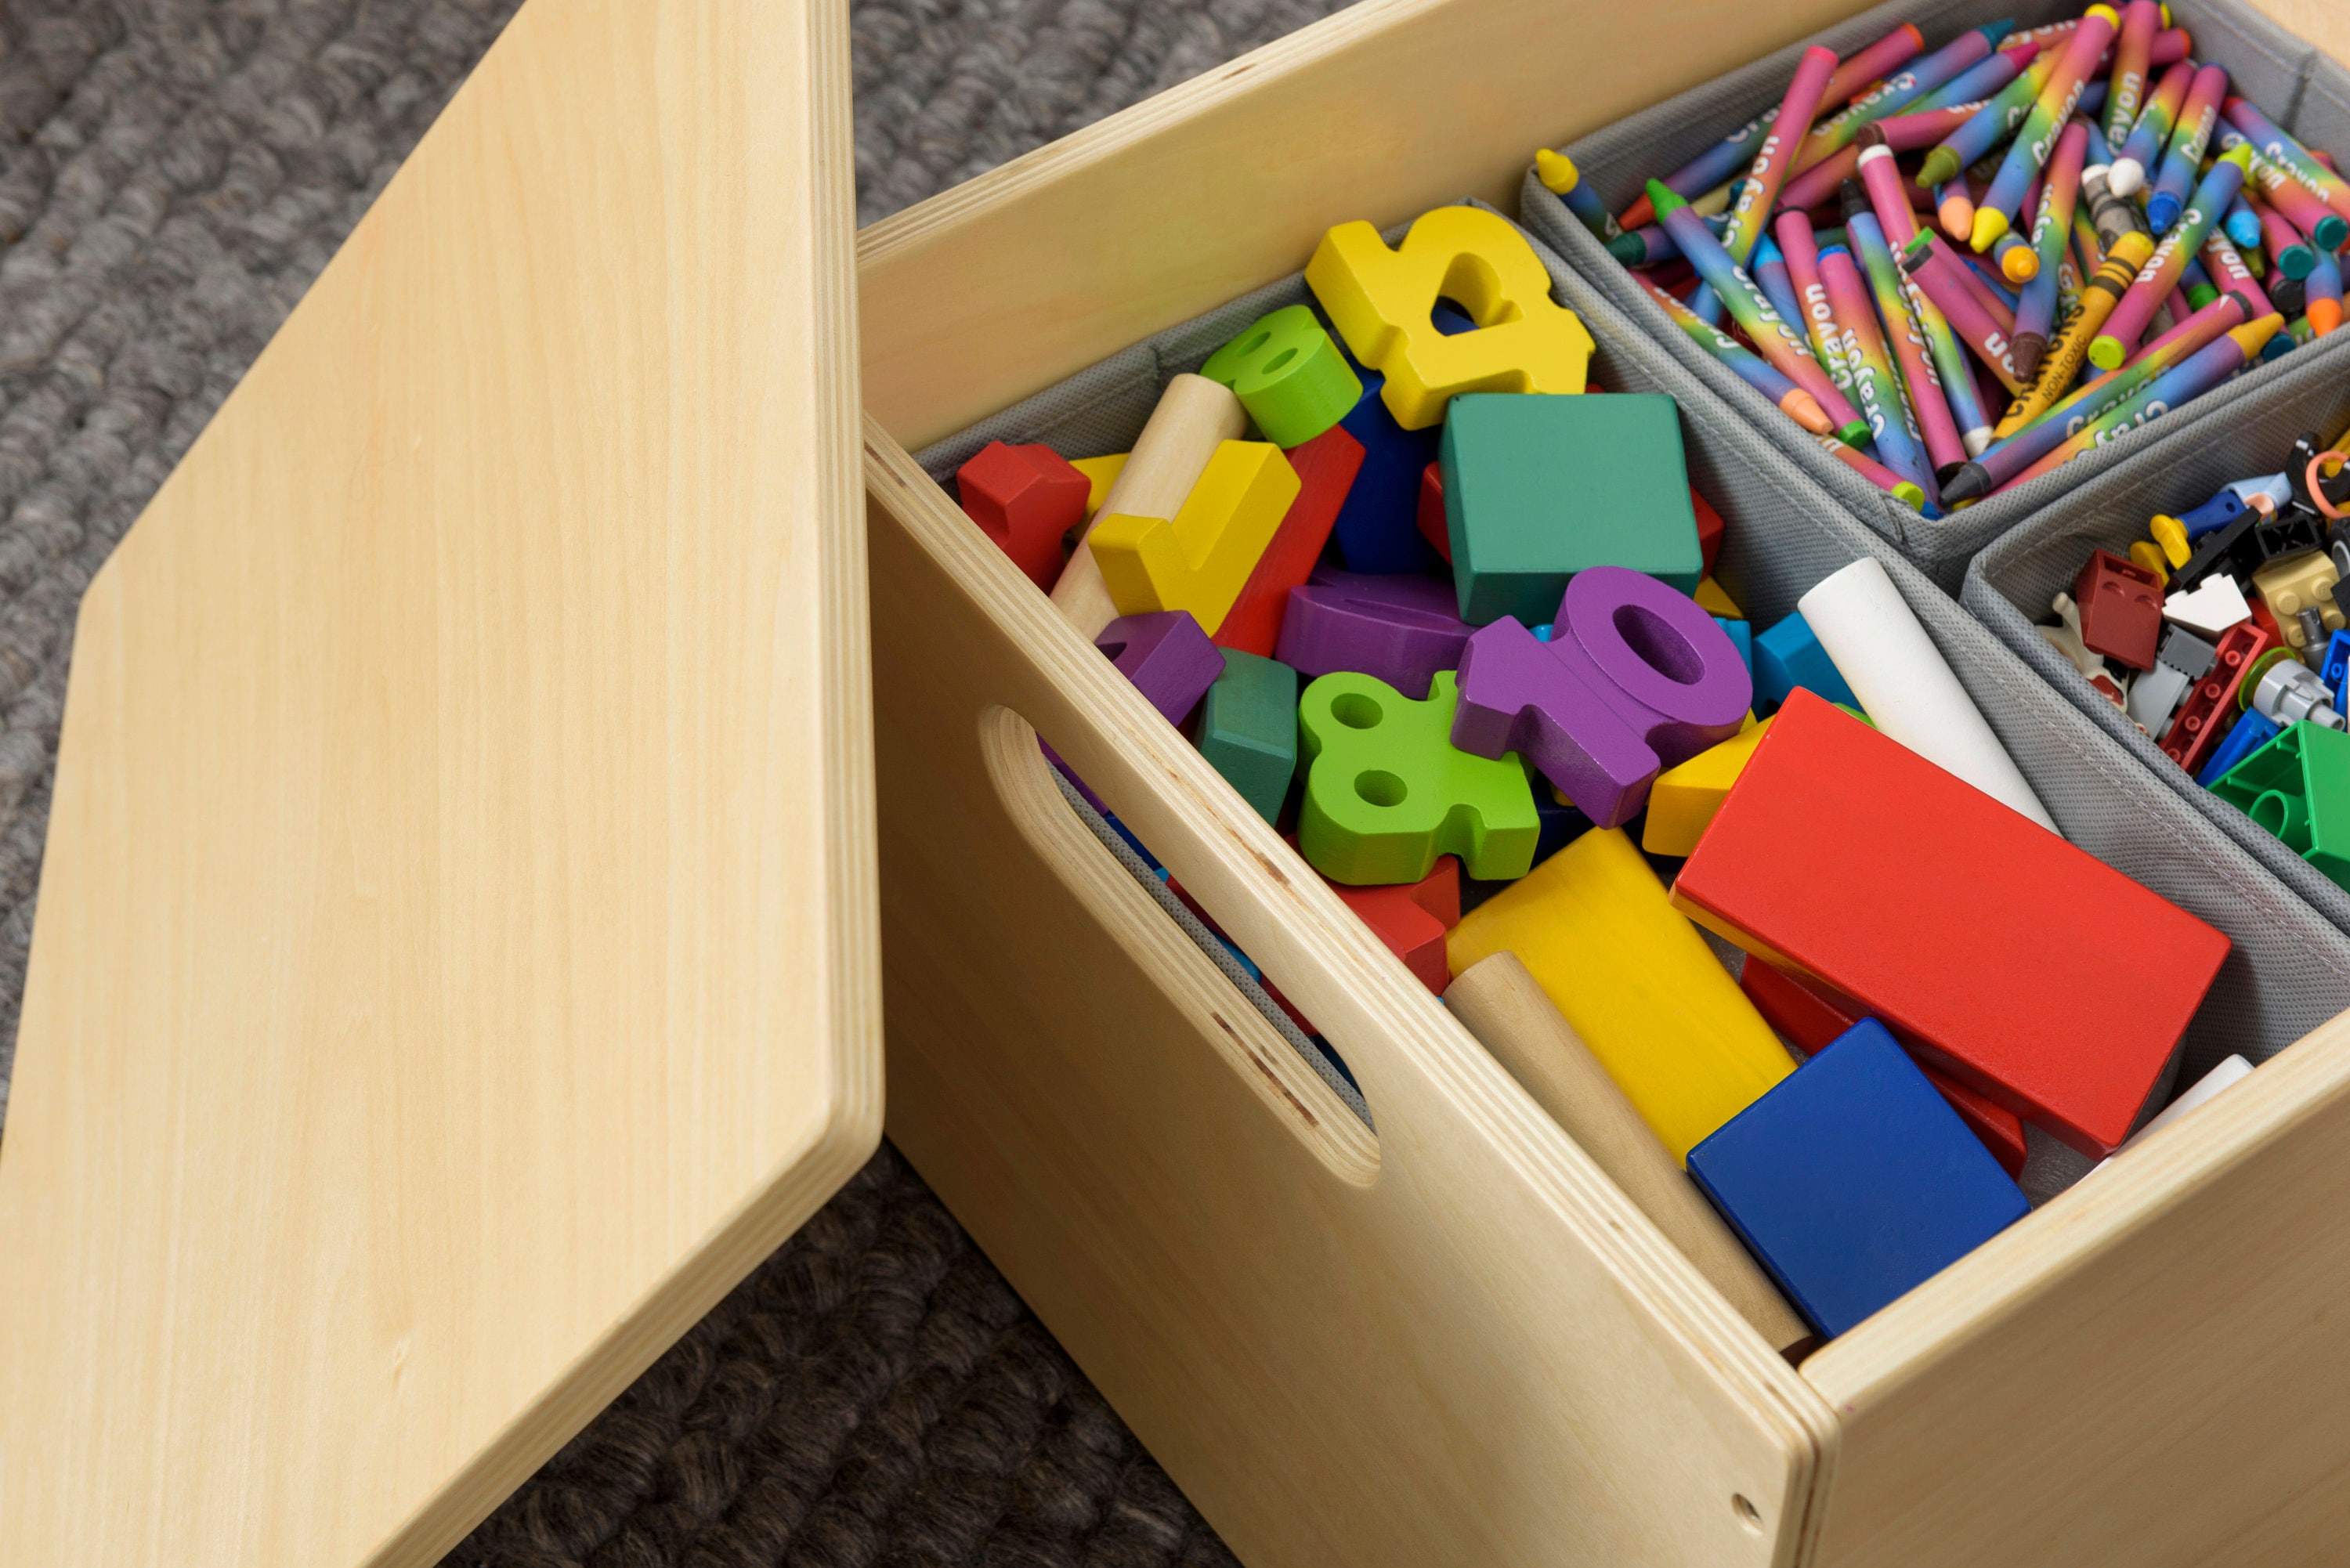 Wooden Toy Box for Lego Storage by Tidy Books Ivory Lid and Dividers  Included 40 X 34 X 24 Cm 